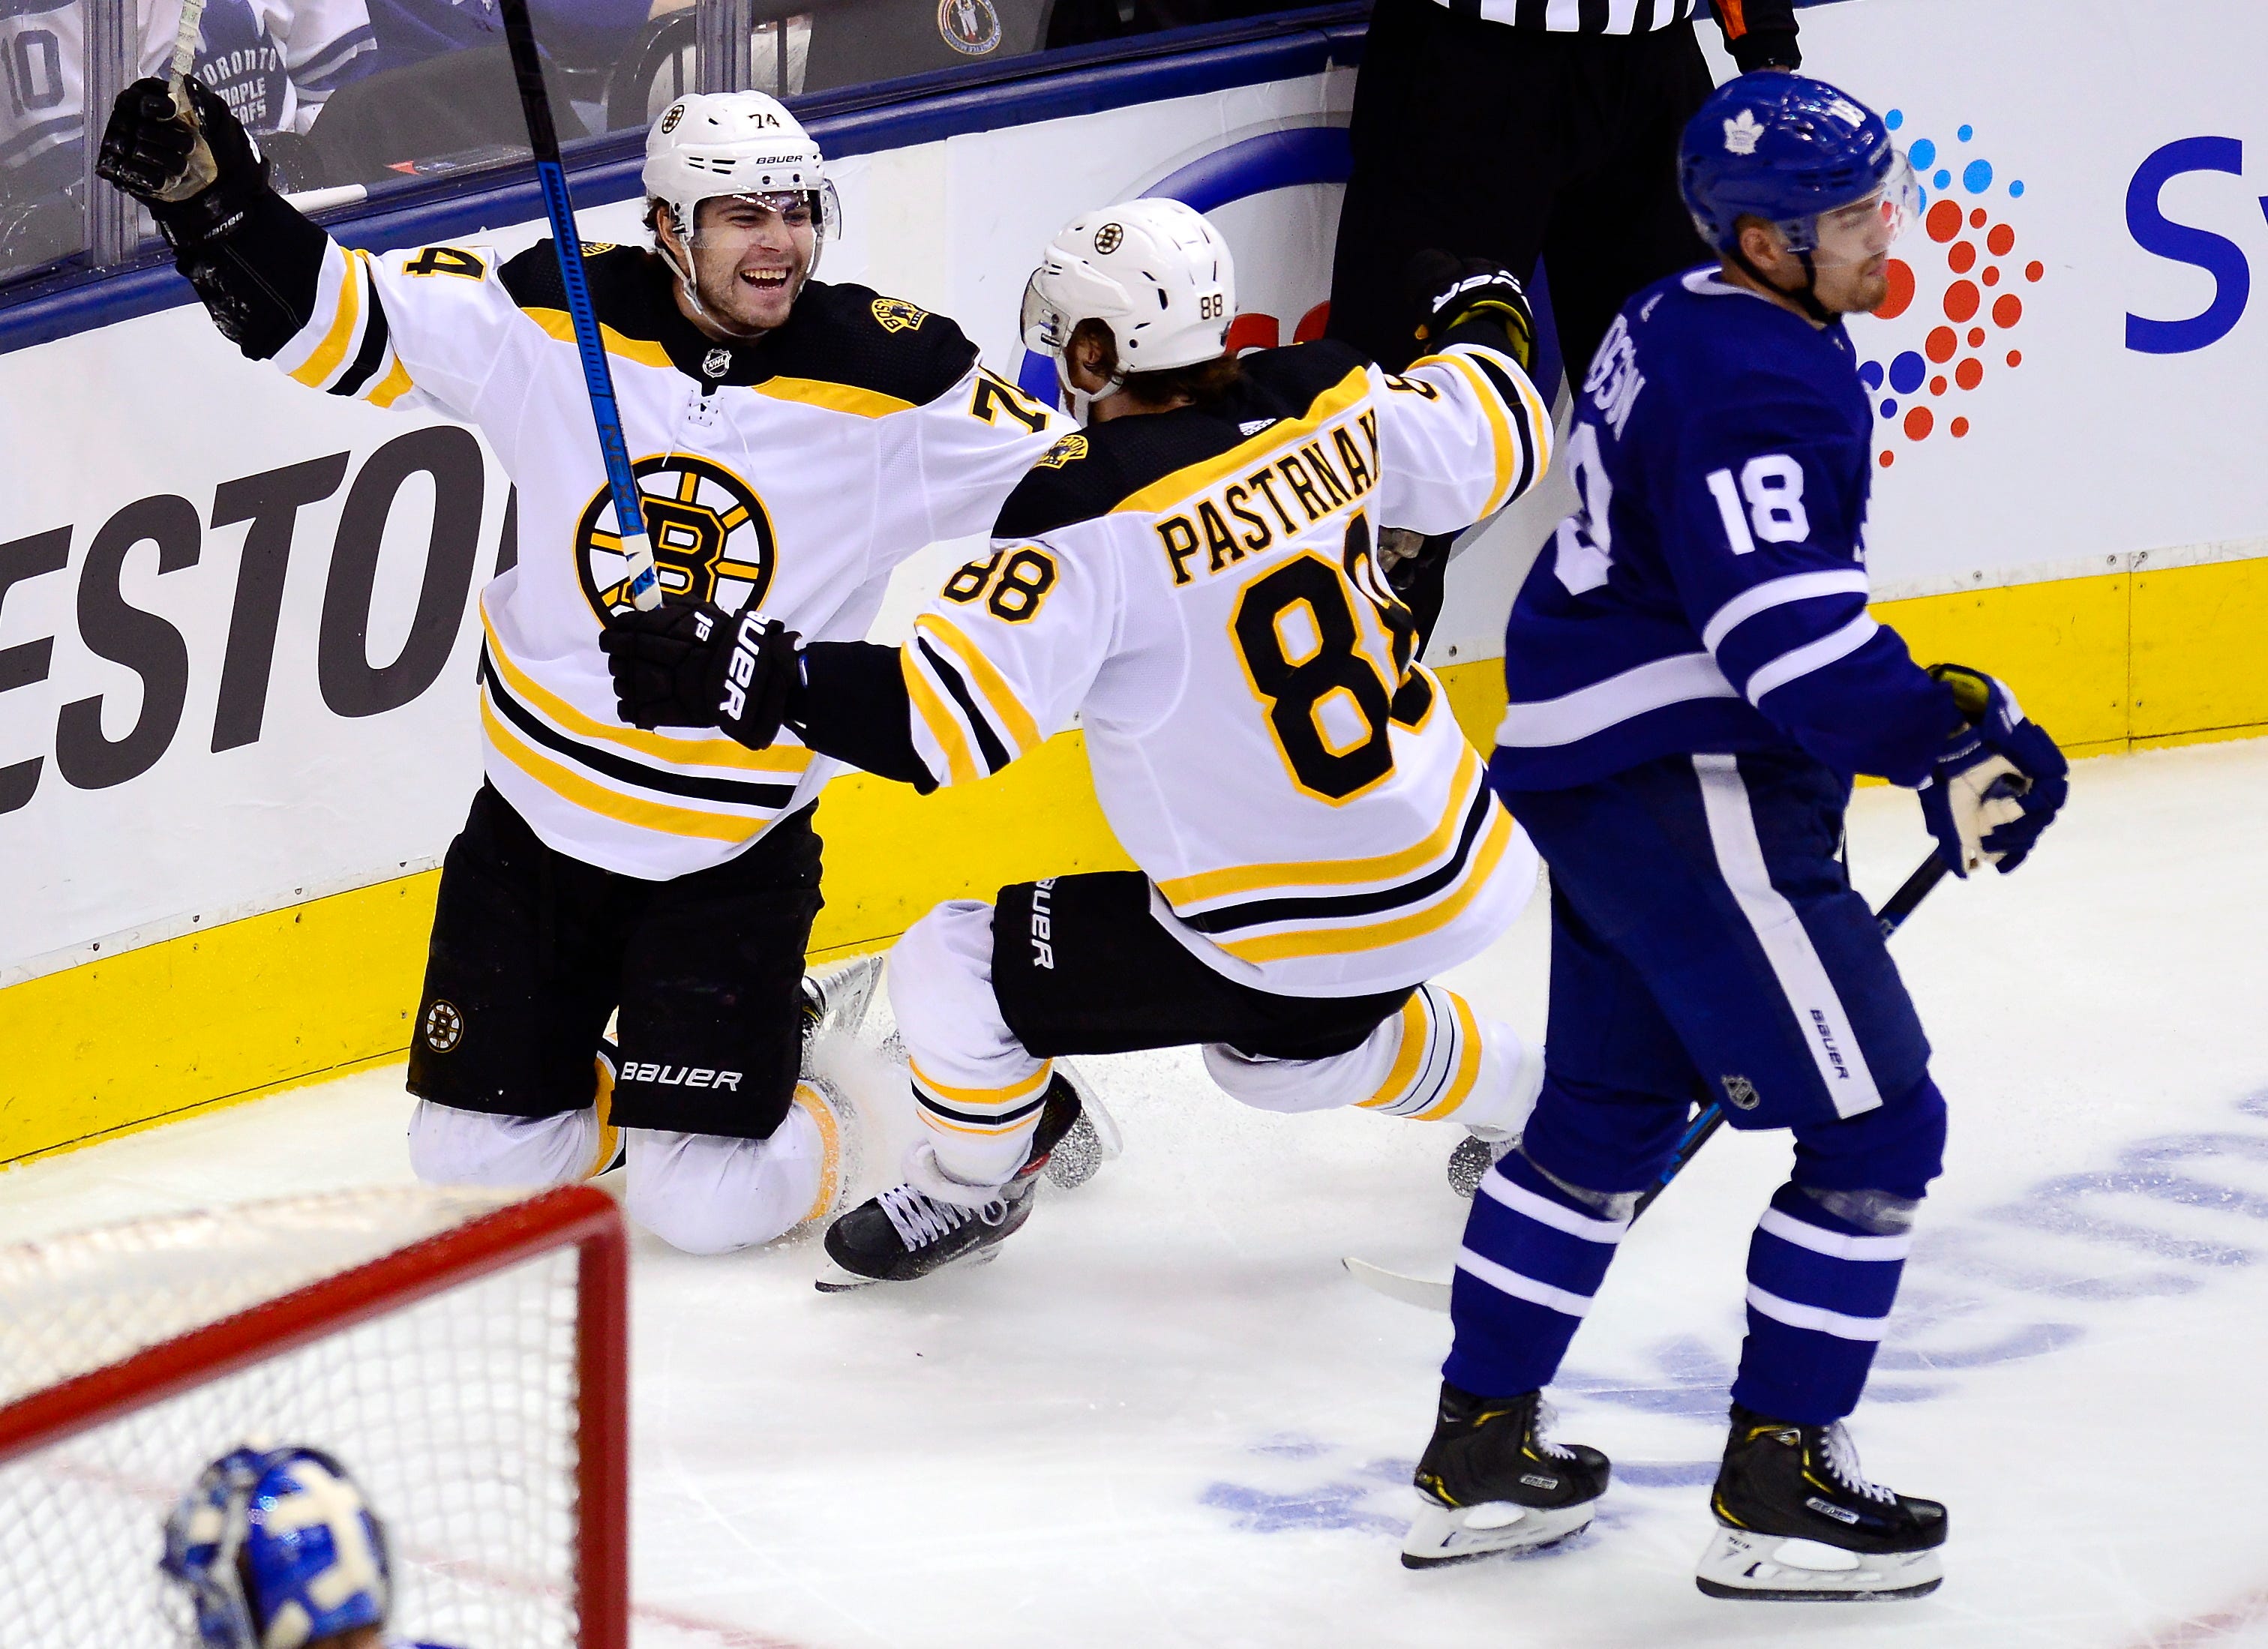 Bruins left wing Jake DeBrusk (74) celebrates his goal with right wing David Pastrnak (88) as Maple Leafs left wing Andreas Johnsson (18) skates by during the second period of Game 6 on Sunday.